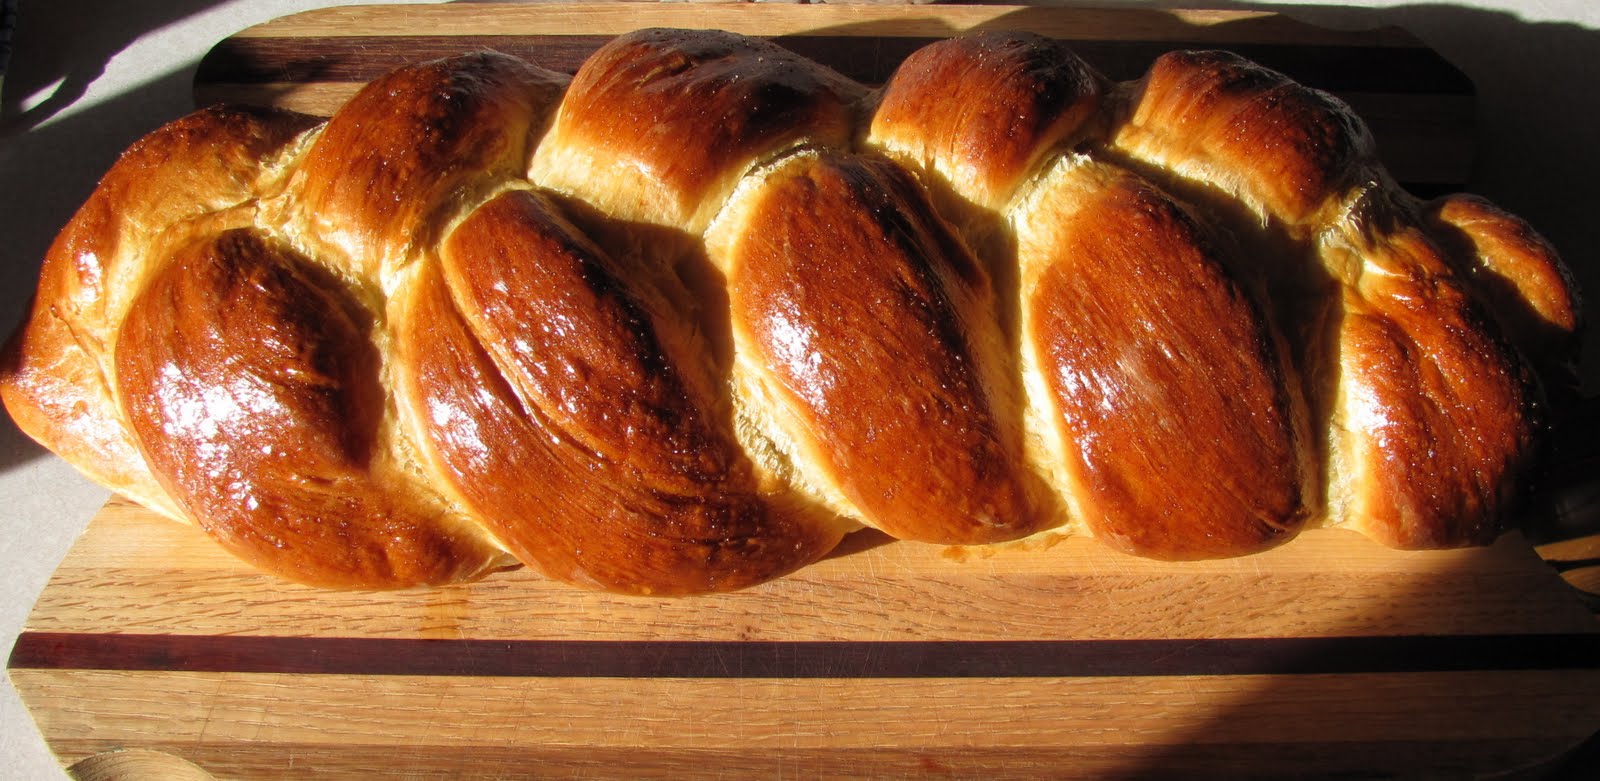 Gastronomists Weekly: Challah